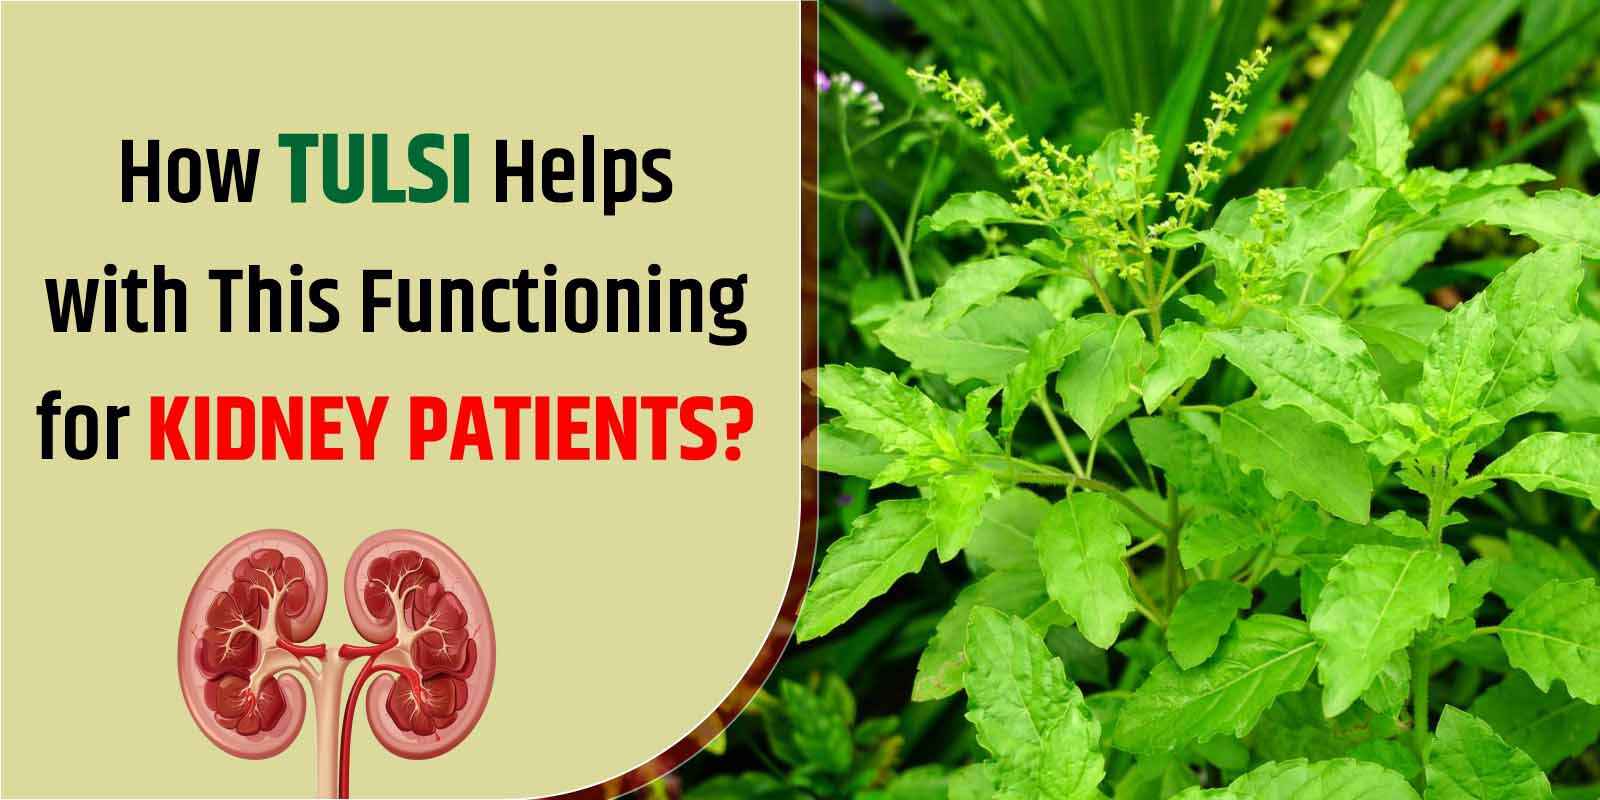 How Tulsi Helps with This Functioning for Kidney Patients?